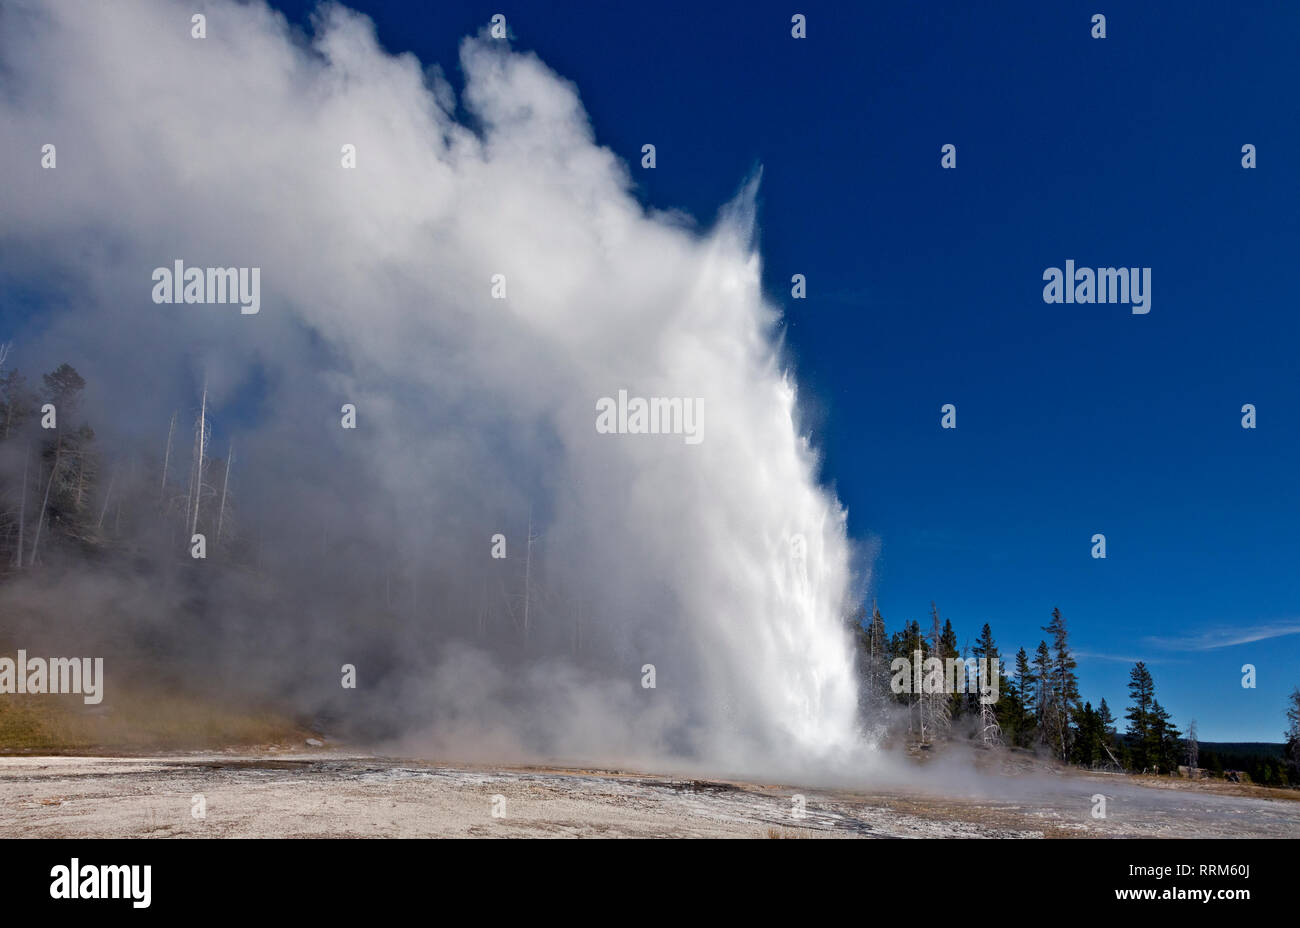 WY03863-00...WYOMING - Grand Geyser, the largest predictable geyser, located in the Upper Geyser Basin of Yellowstone National Park. Stock Photo